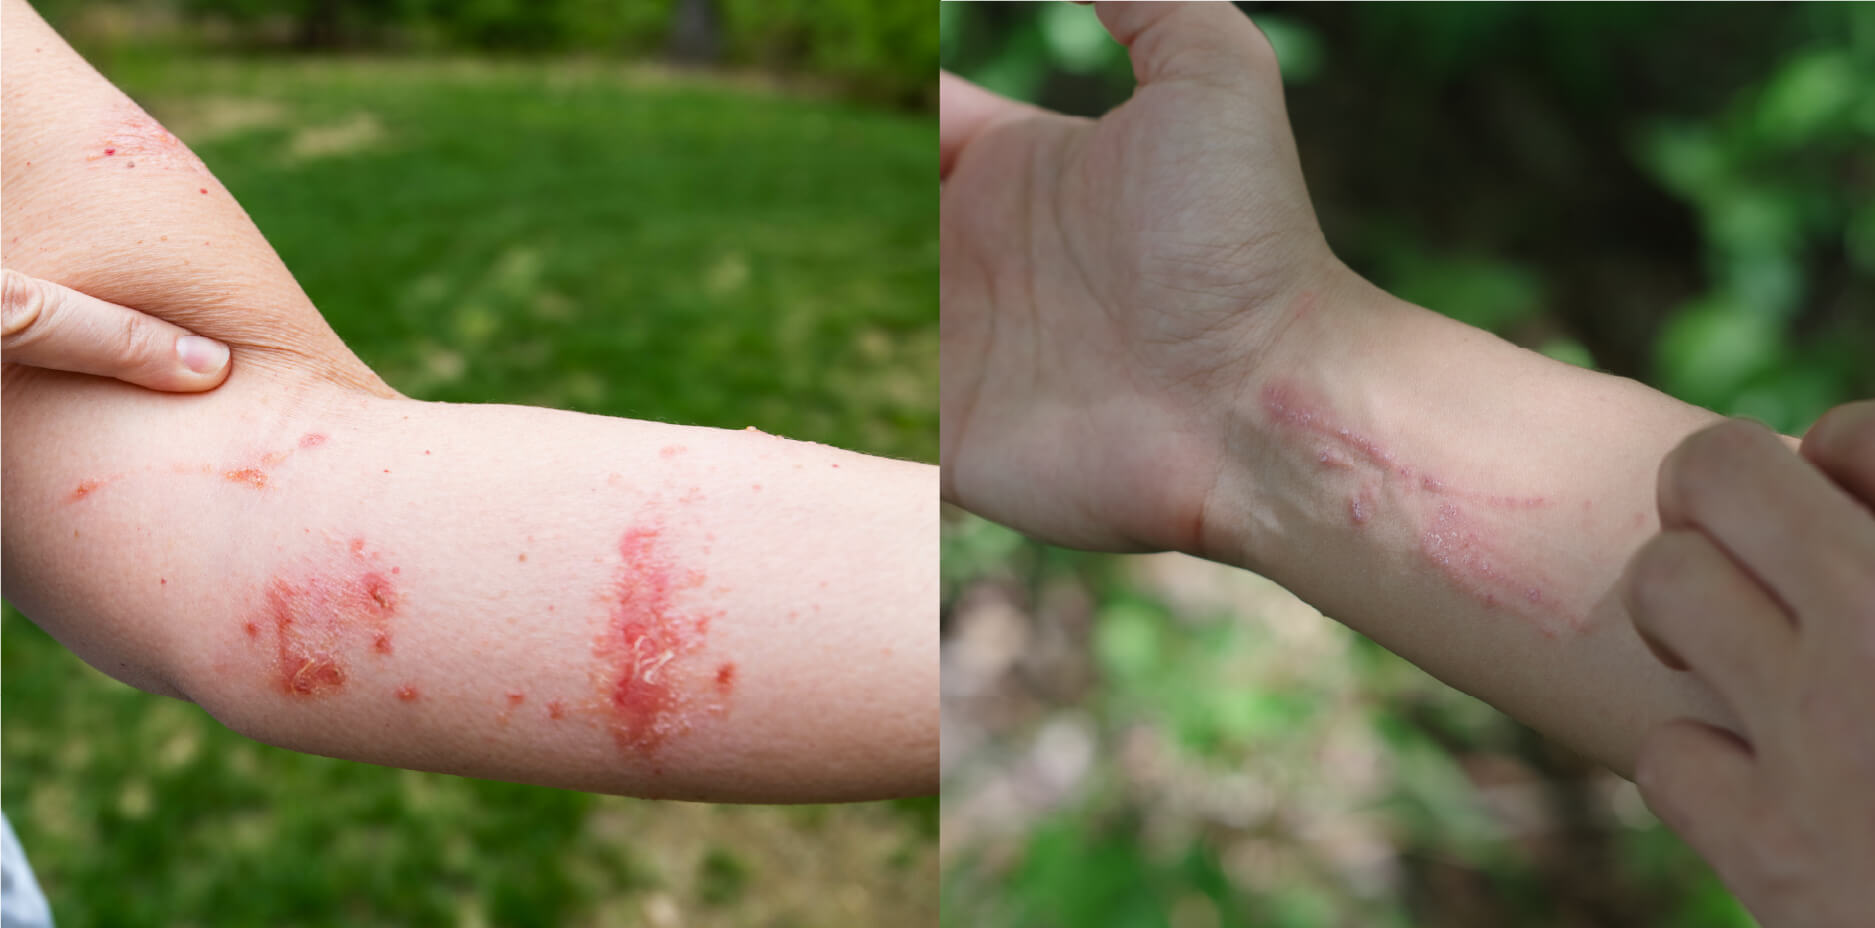 Two images showing examples of poison ivy and poison oak rash. The first image is of patchy hives and blisters on a woman's forearm. The second image is of dry scratch-like lines on a man's wrist.